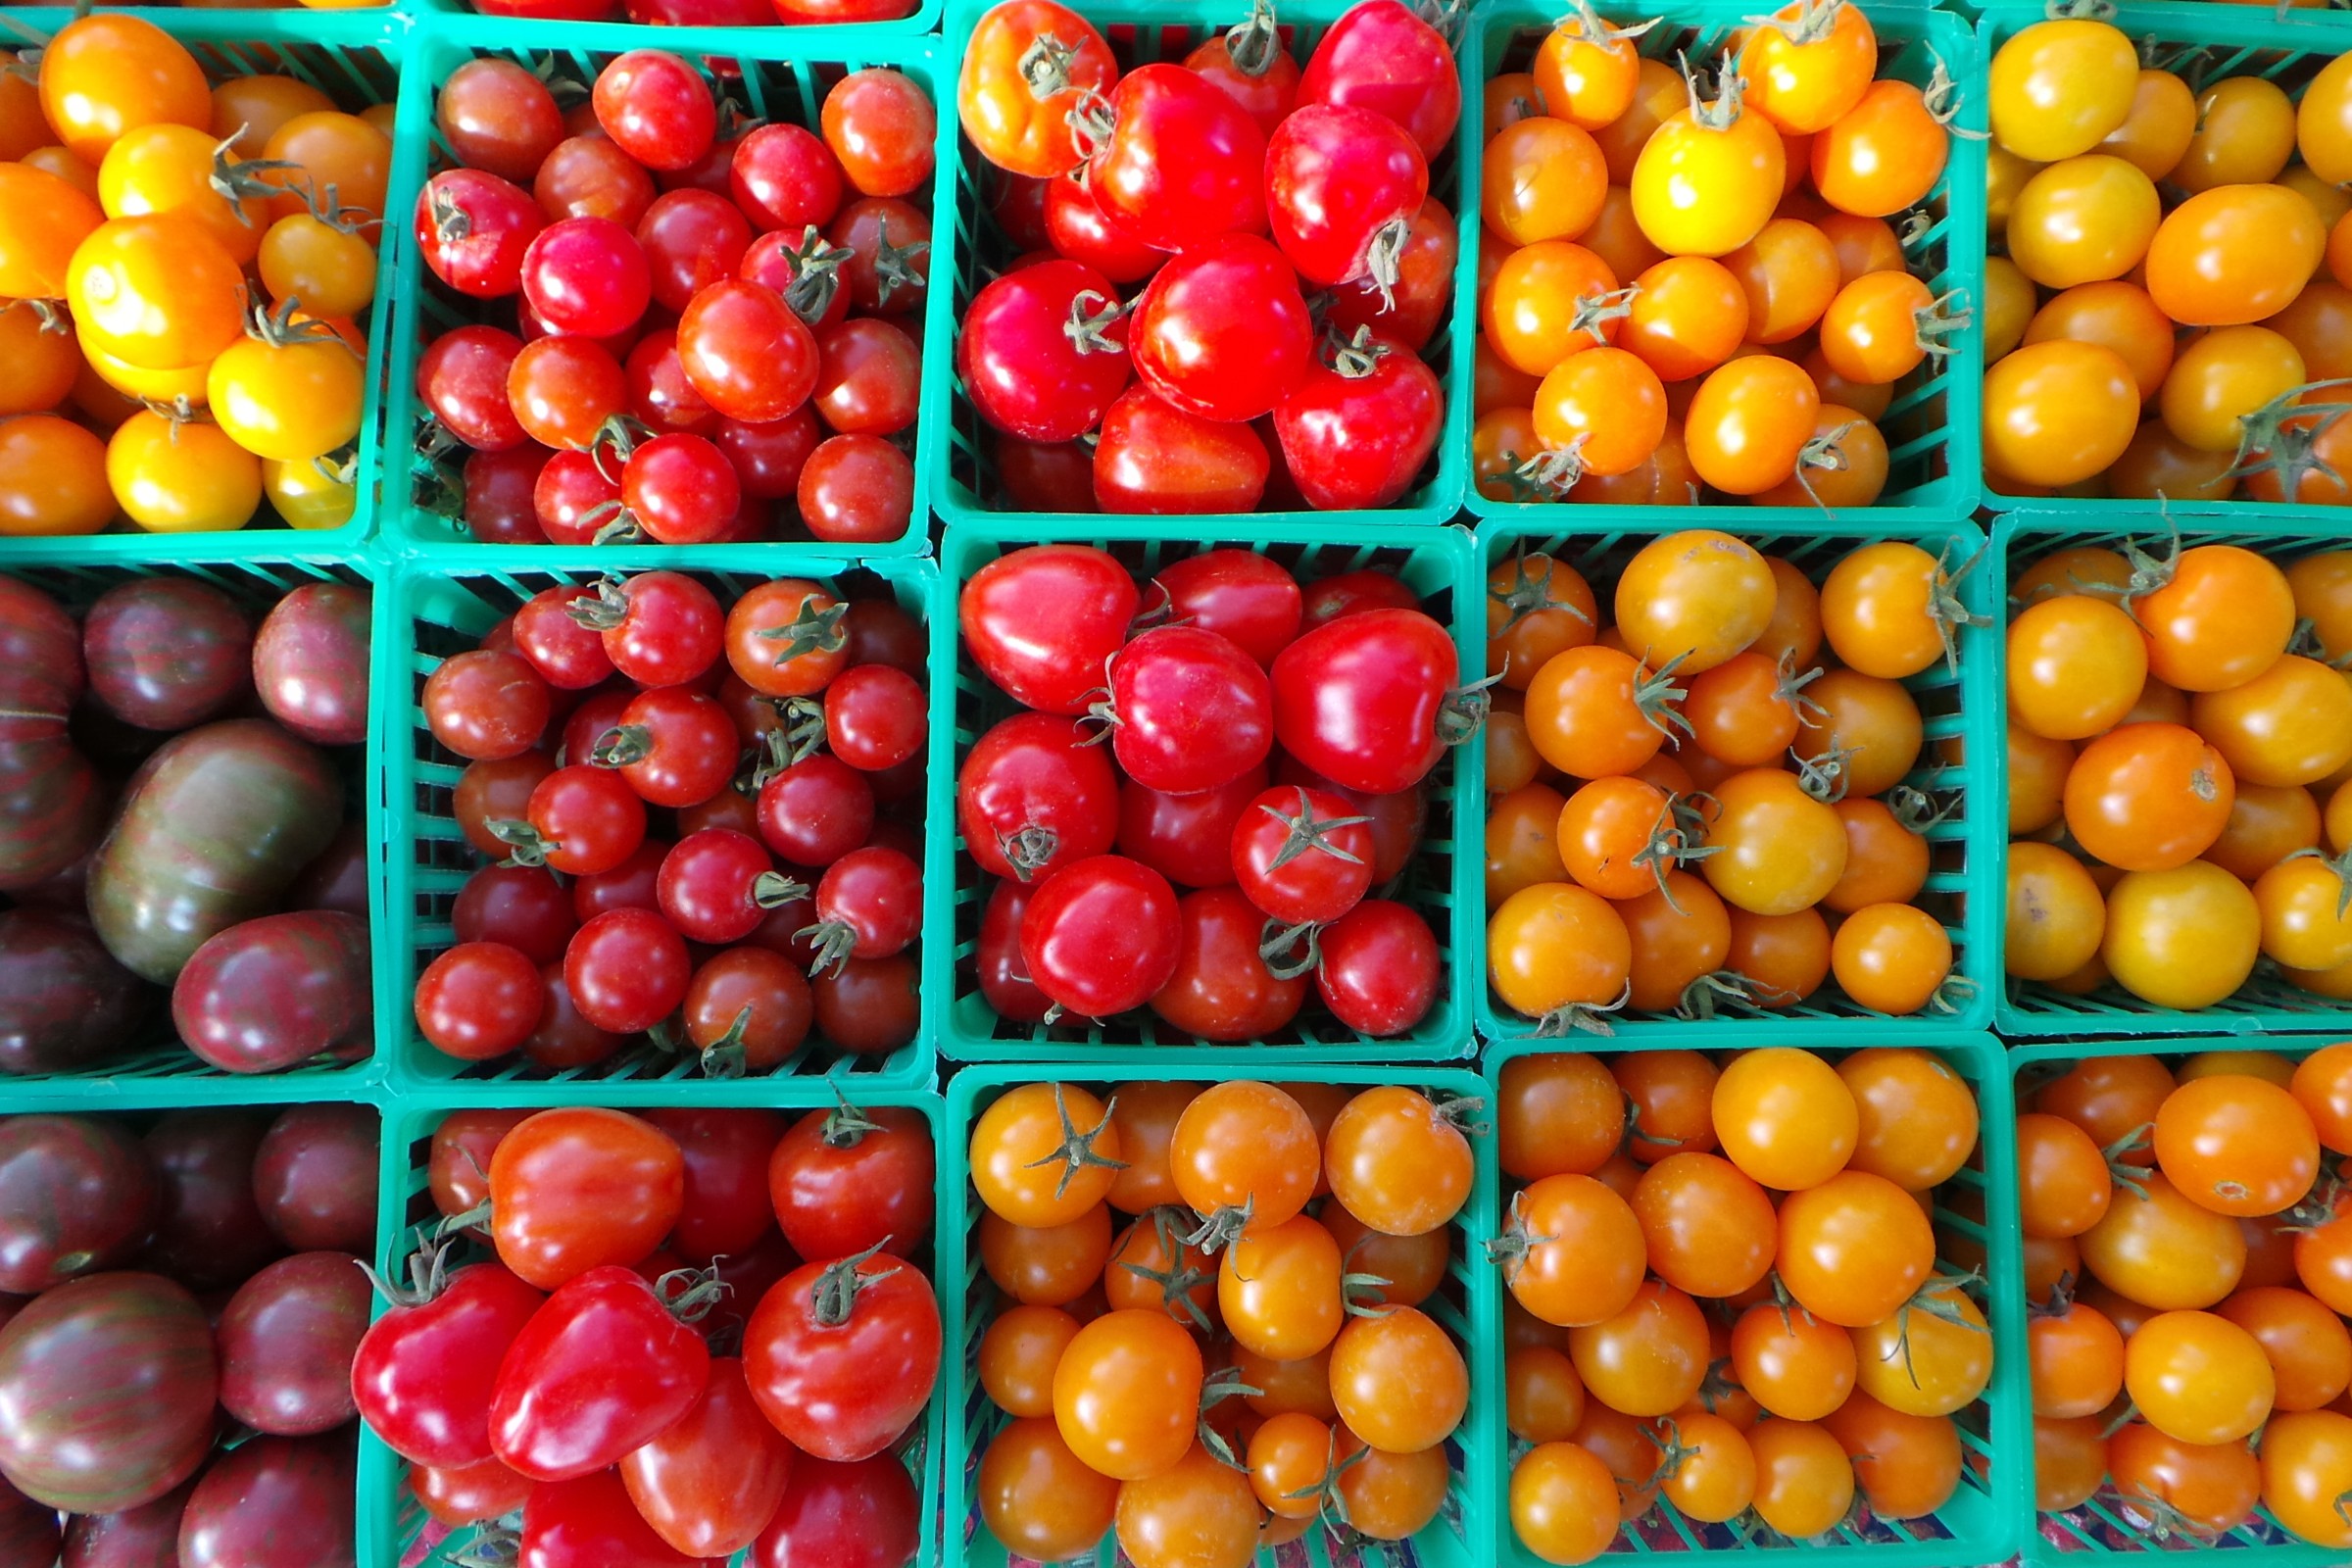 Solanaceae: Growing Tomatoes, Peppers, and Eggplants